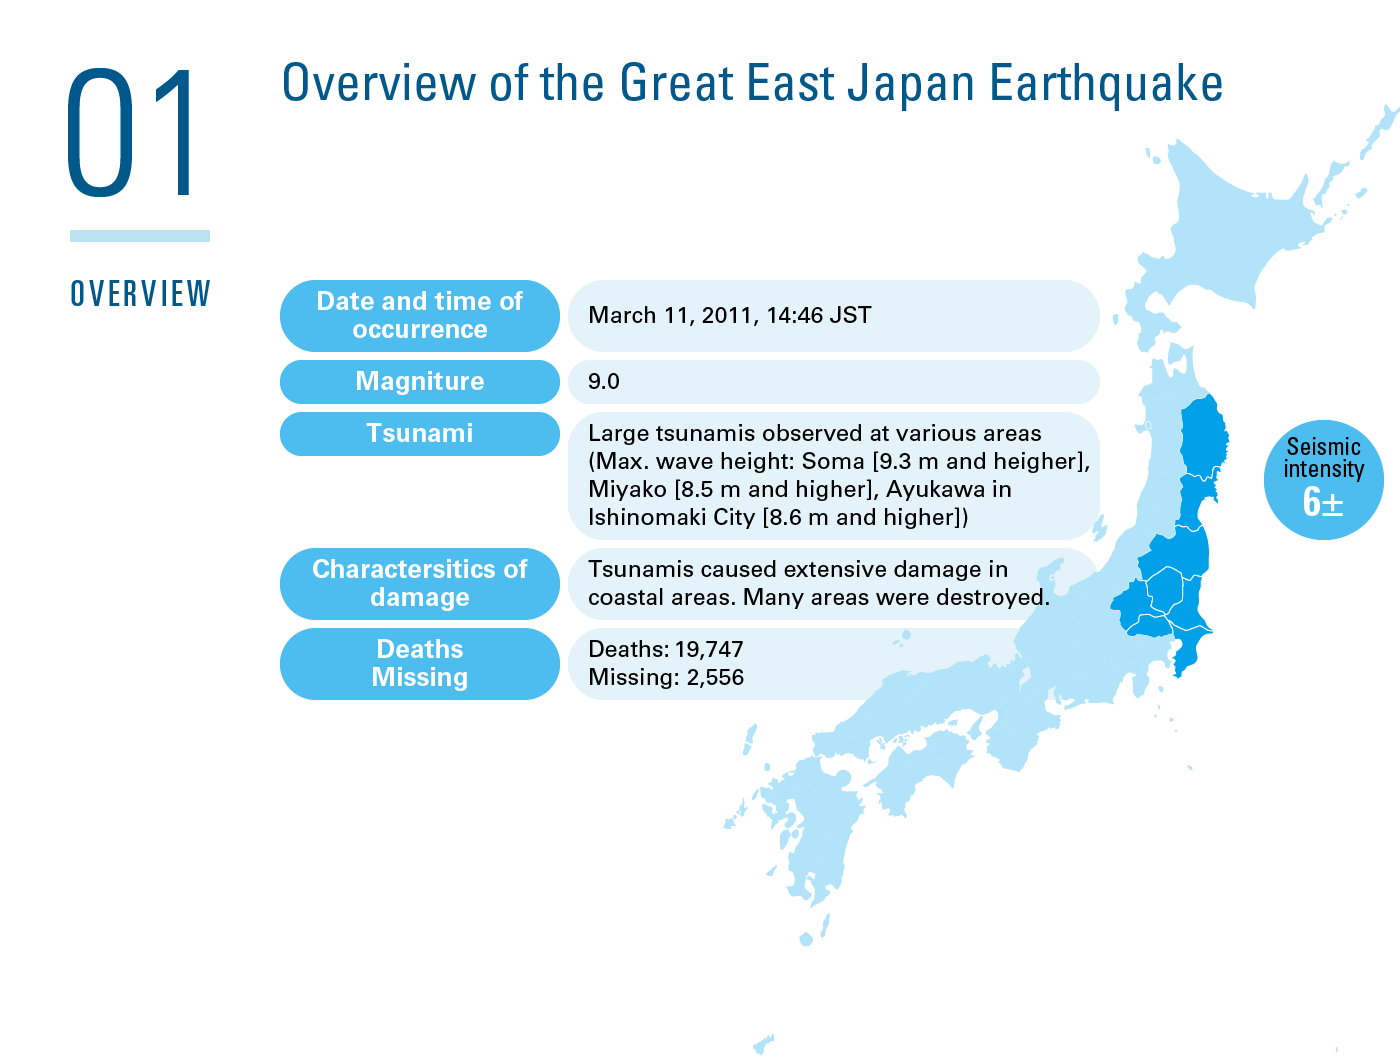 Overview of the Great East Japan Earthquake